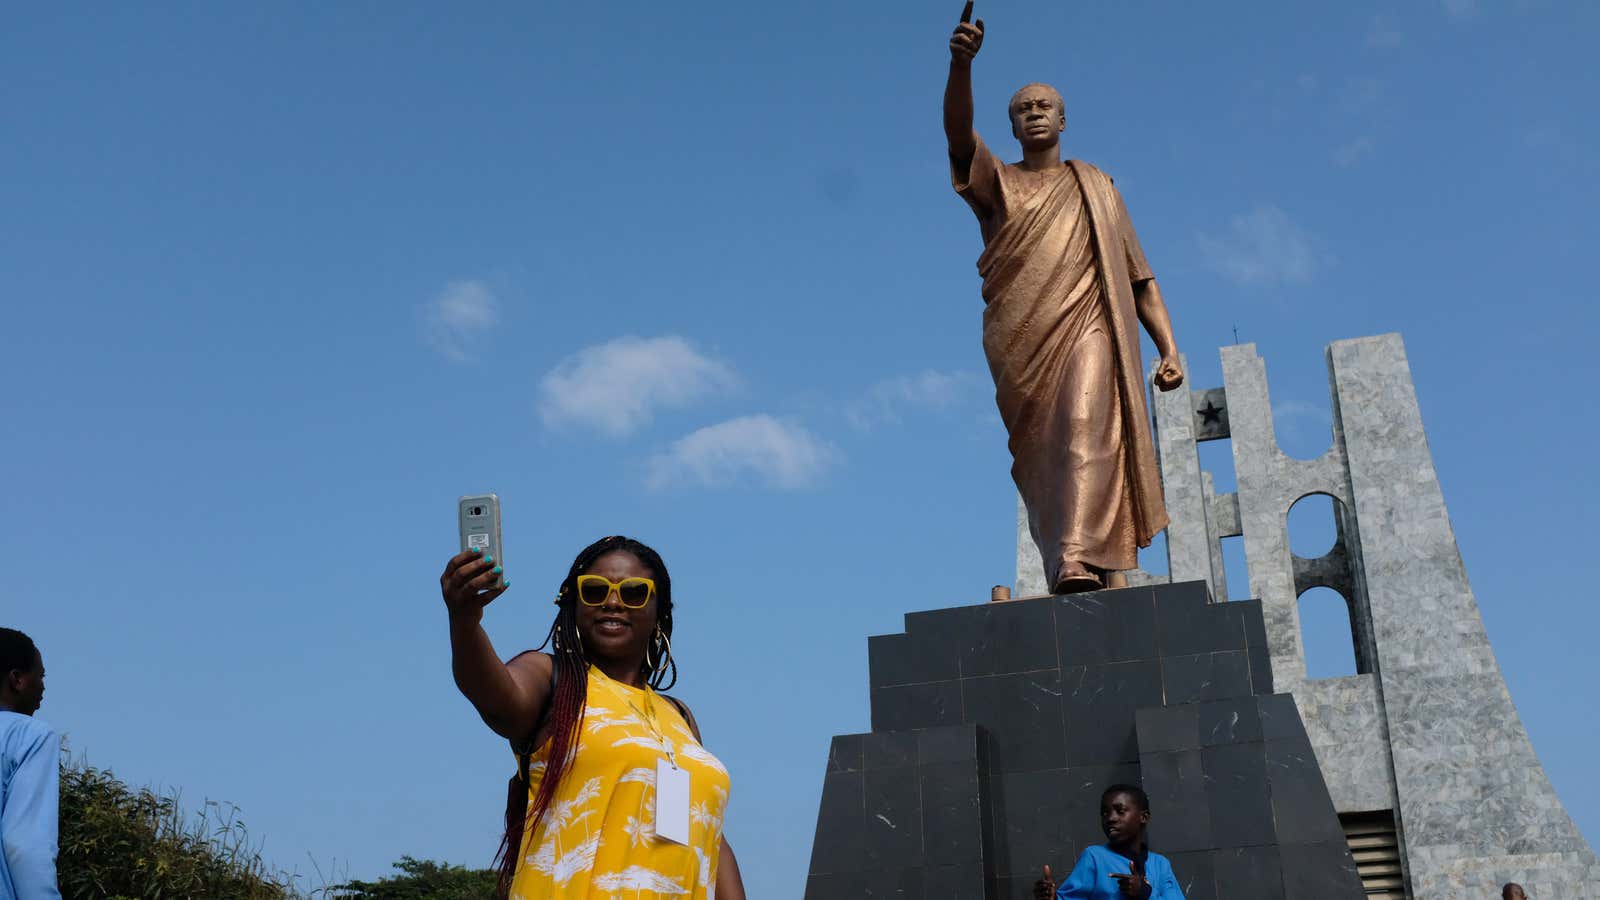 A member of an African American heritage tour group in Ghana takes a selfie under the statue of Ghana’s first president Kwame Nkrumah in Accra, Aug. 7, 2019